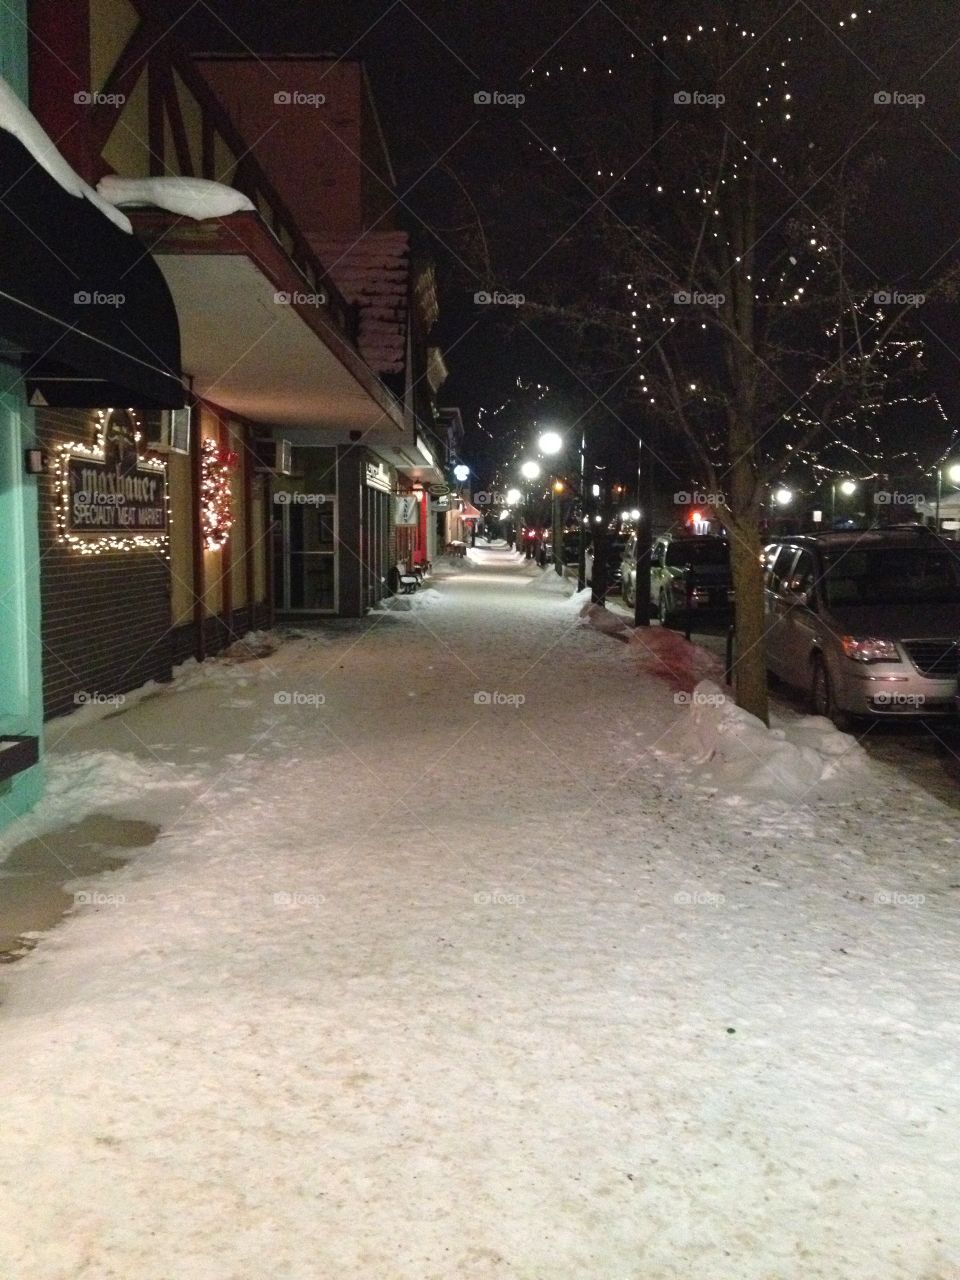 Snowy sidewalk in charming town covered in snow at night.